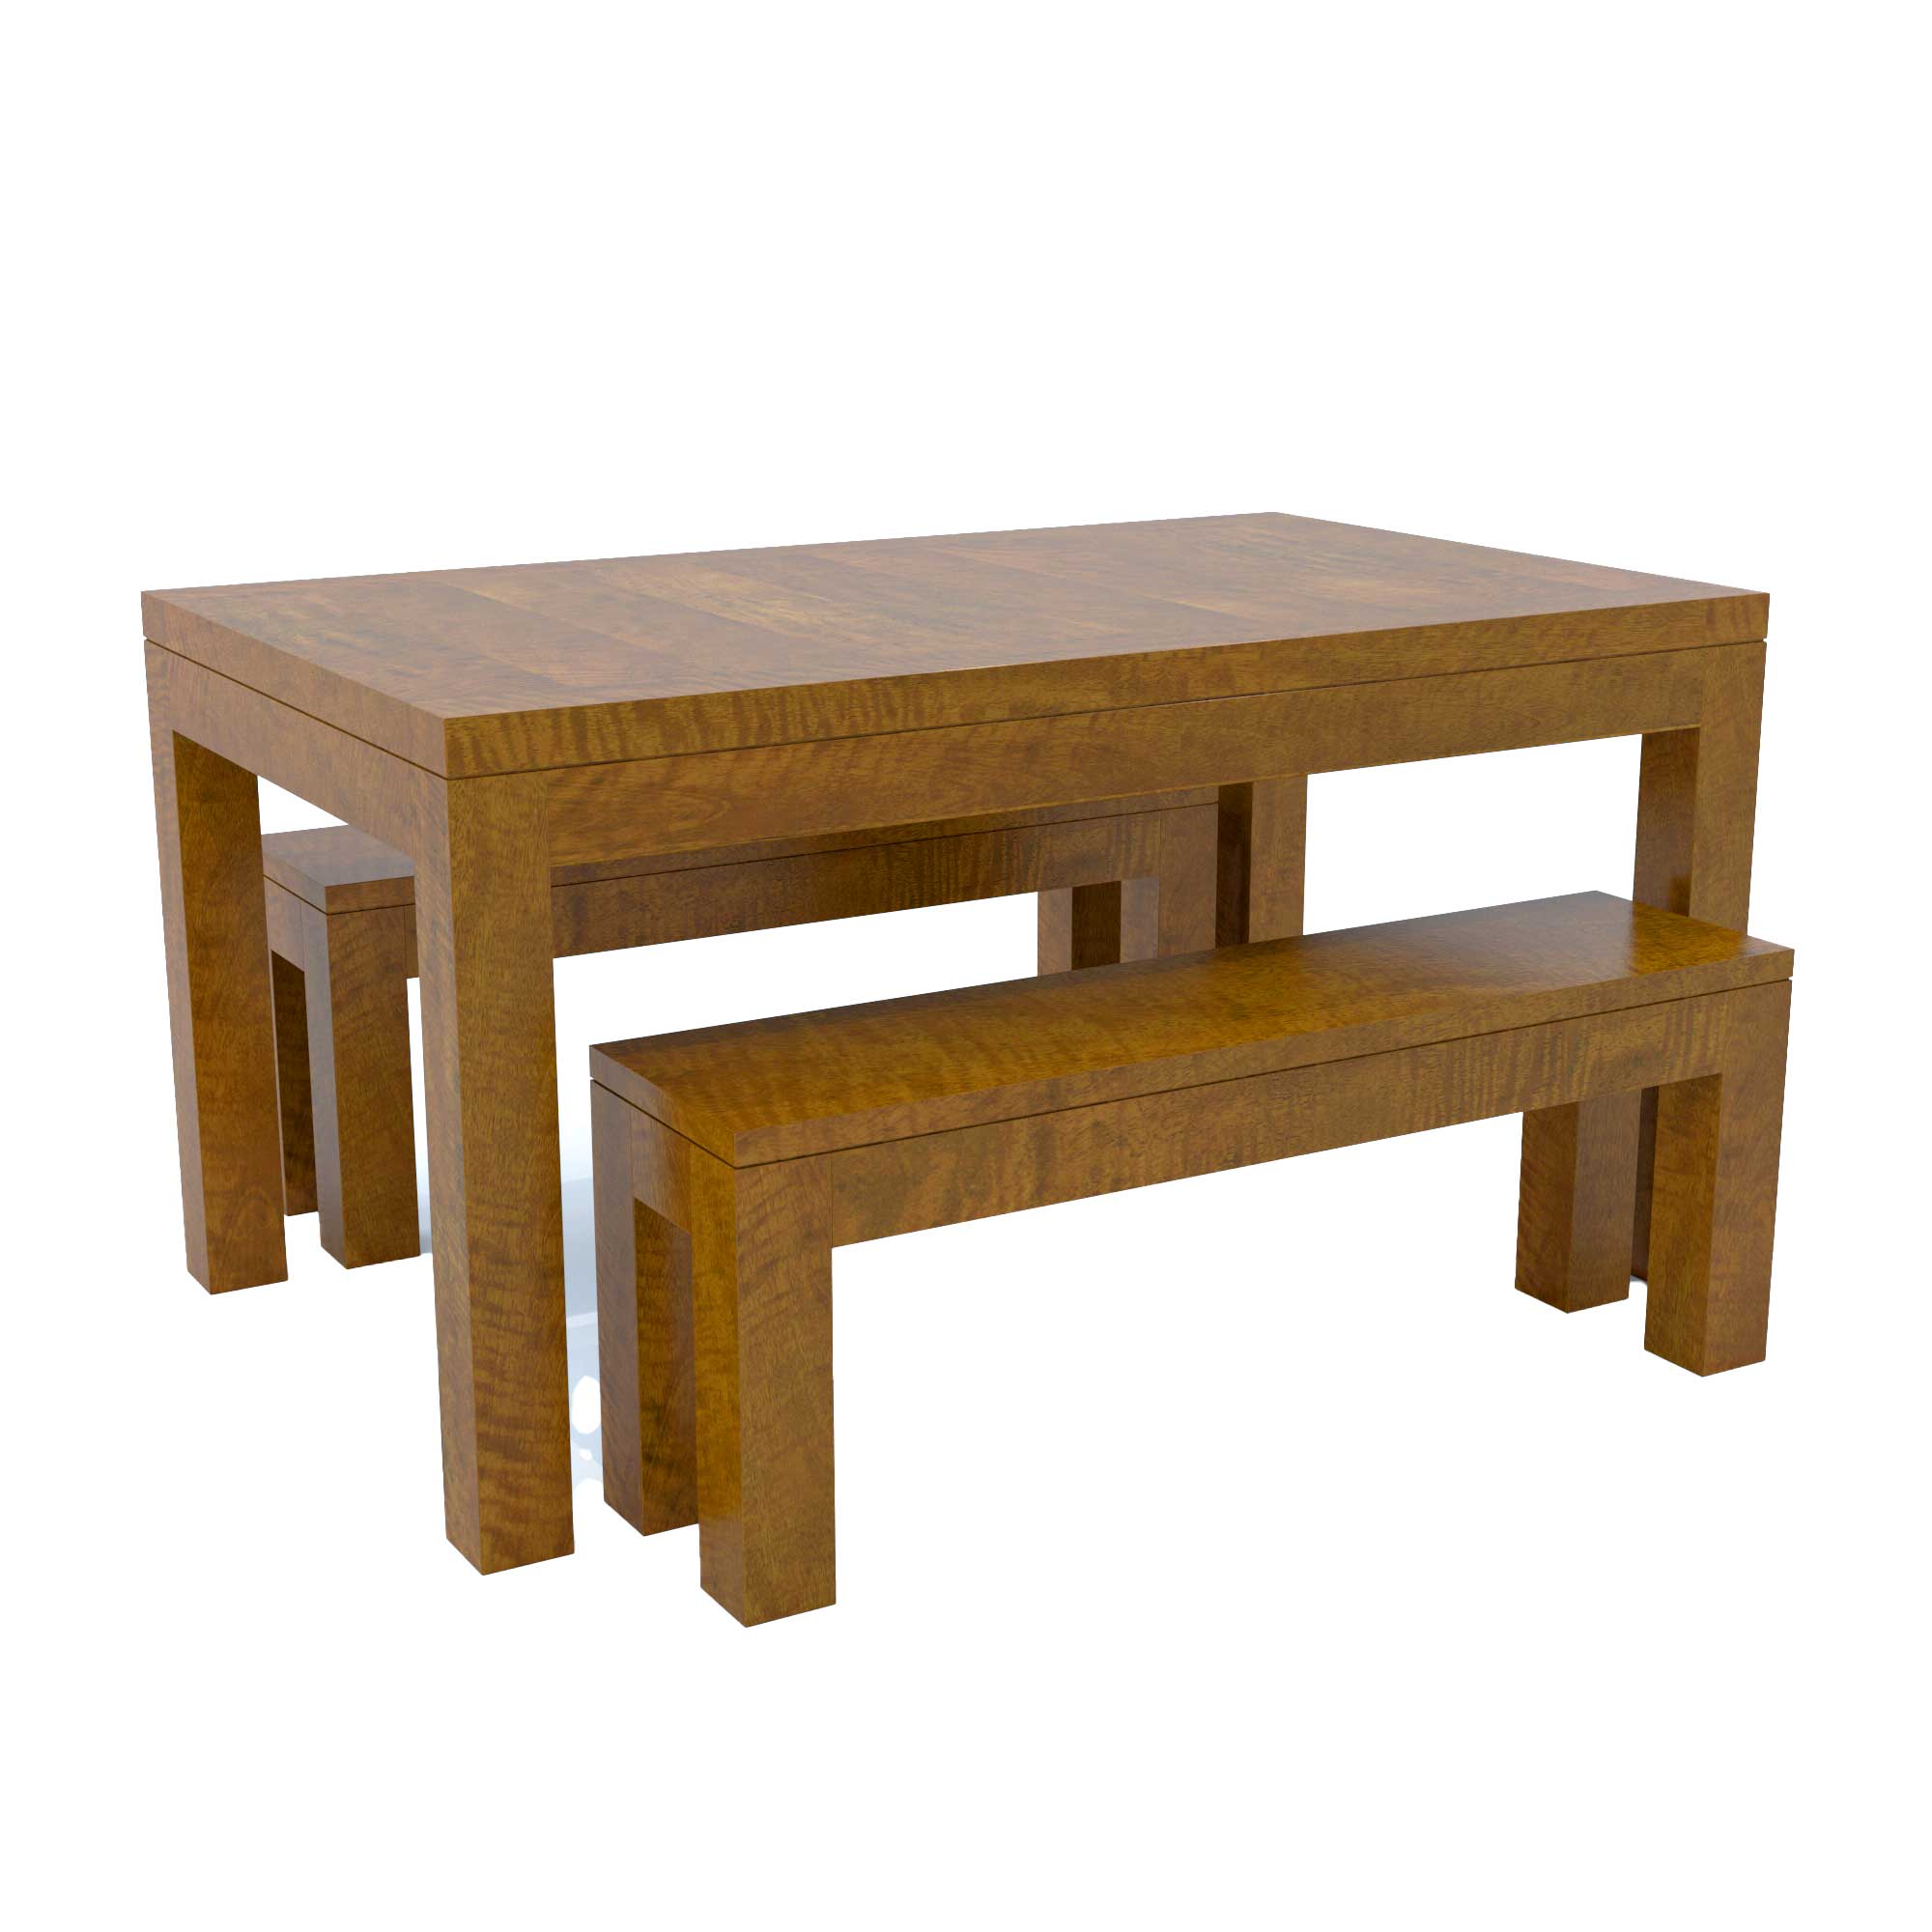 NEW-YORK-TABLE-BENCH-SET-PACKAGE